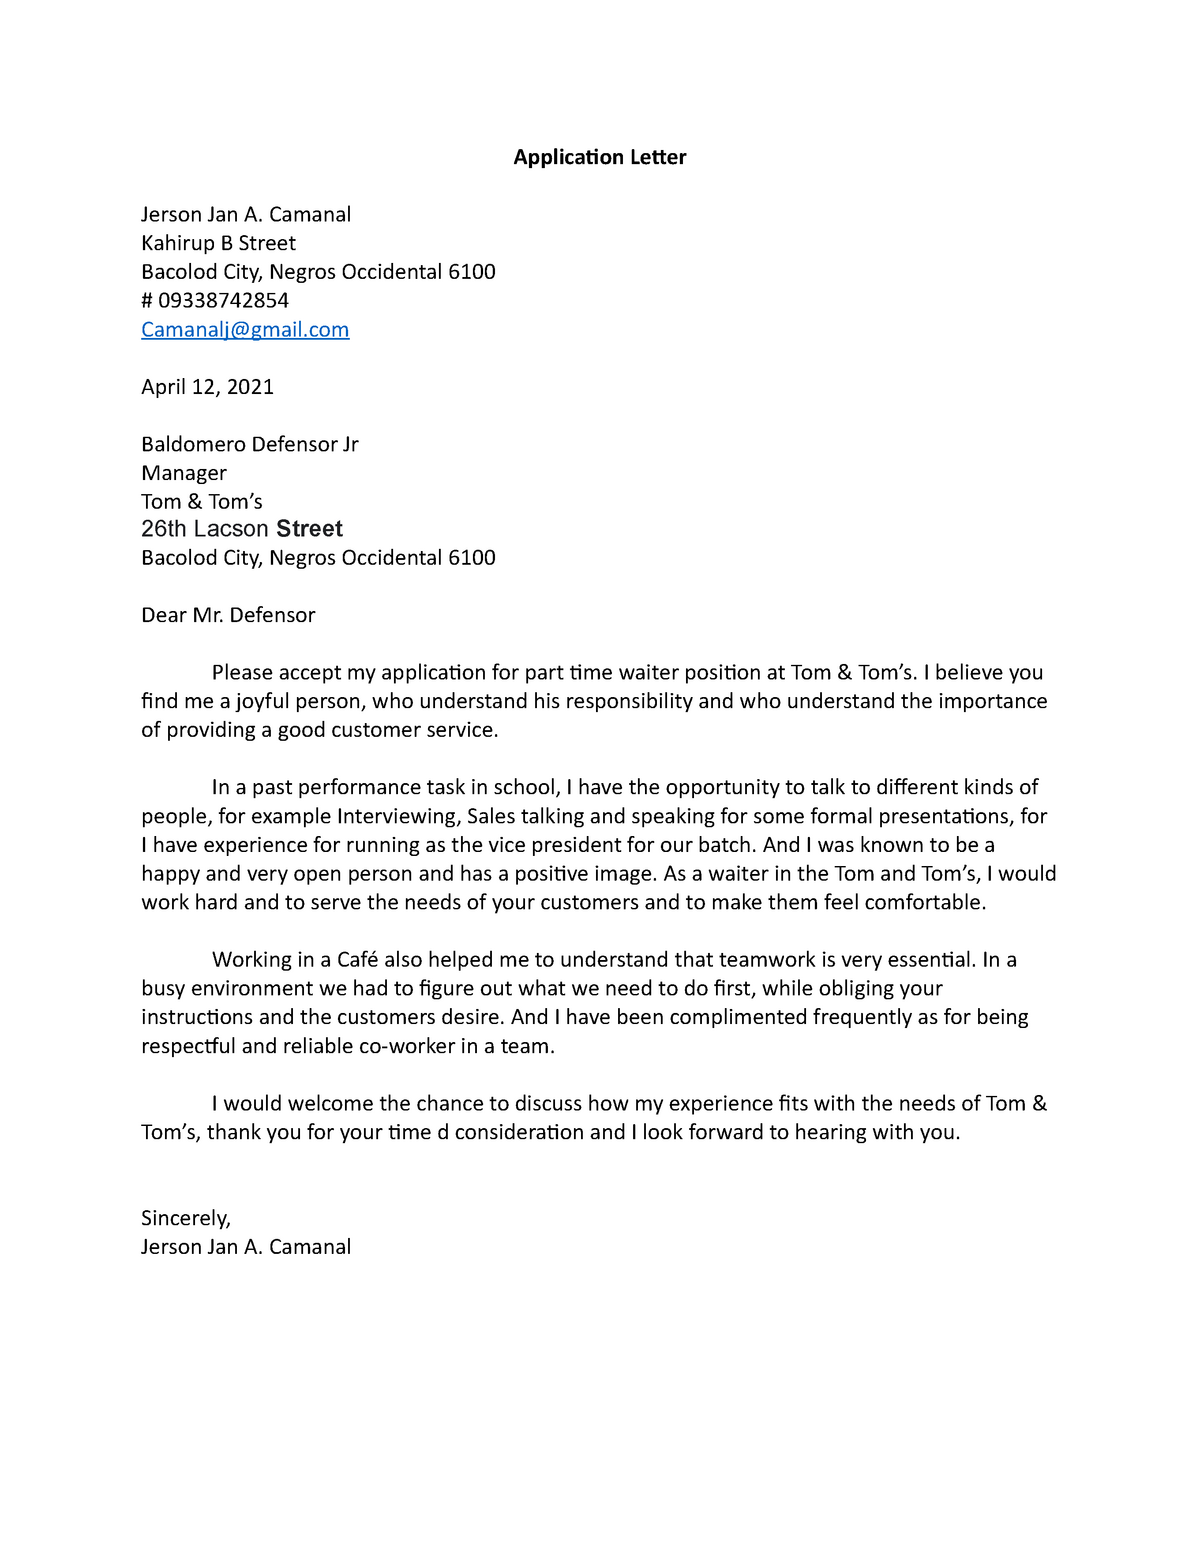 Application Letter Example - Application Letter Jerson Jan A. Camanal ...